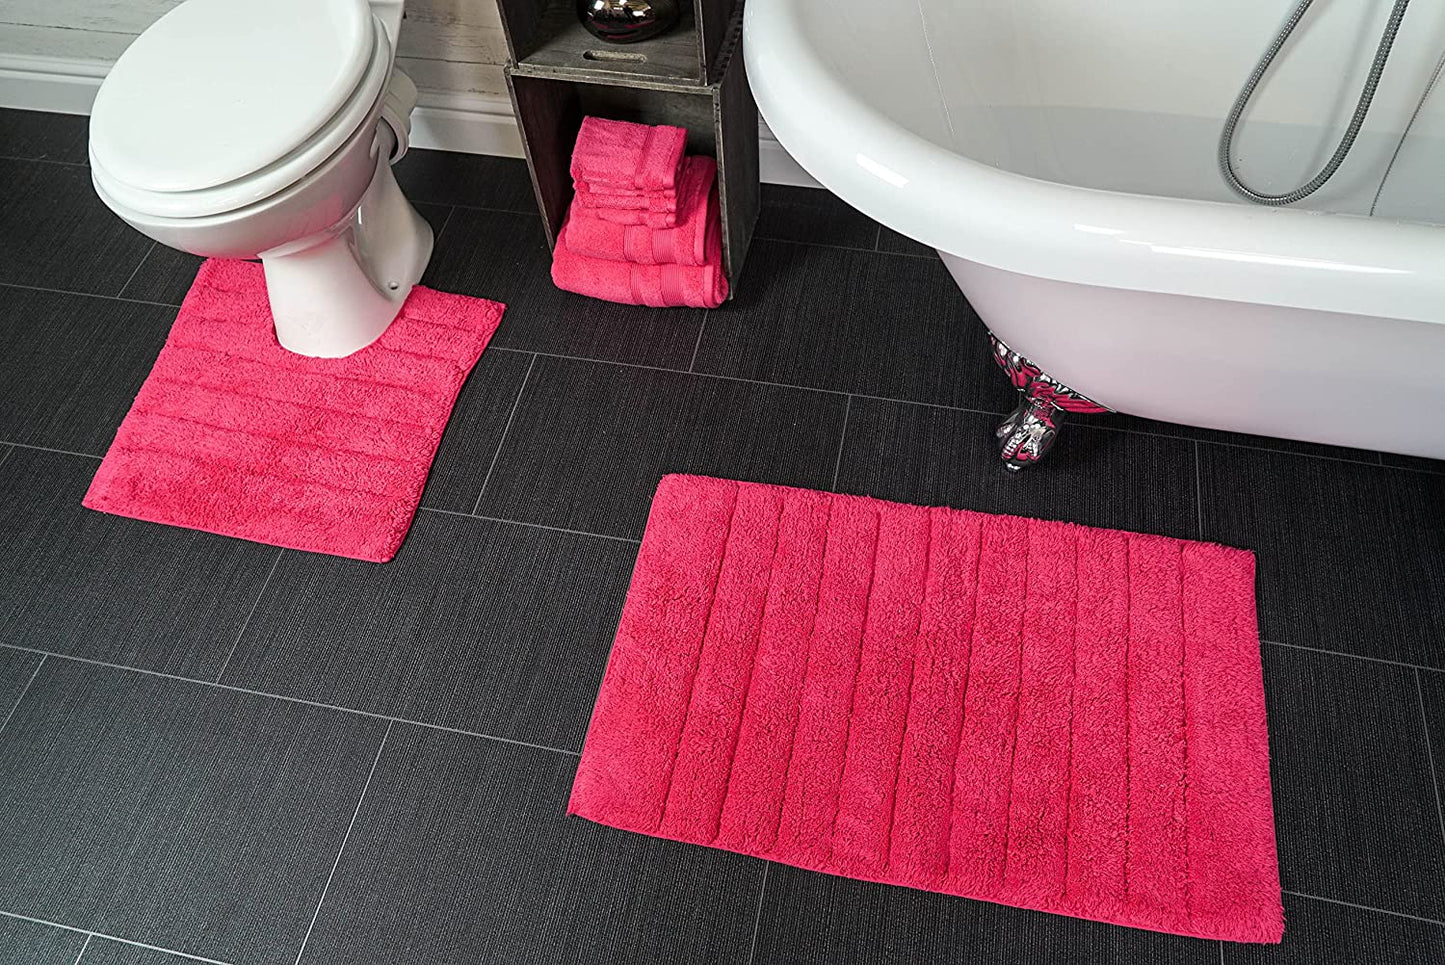 100% Cotton Two Piece Linear Rib Bath and Pedestal Mat in Hot Pink